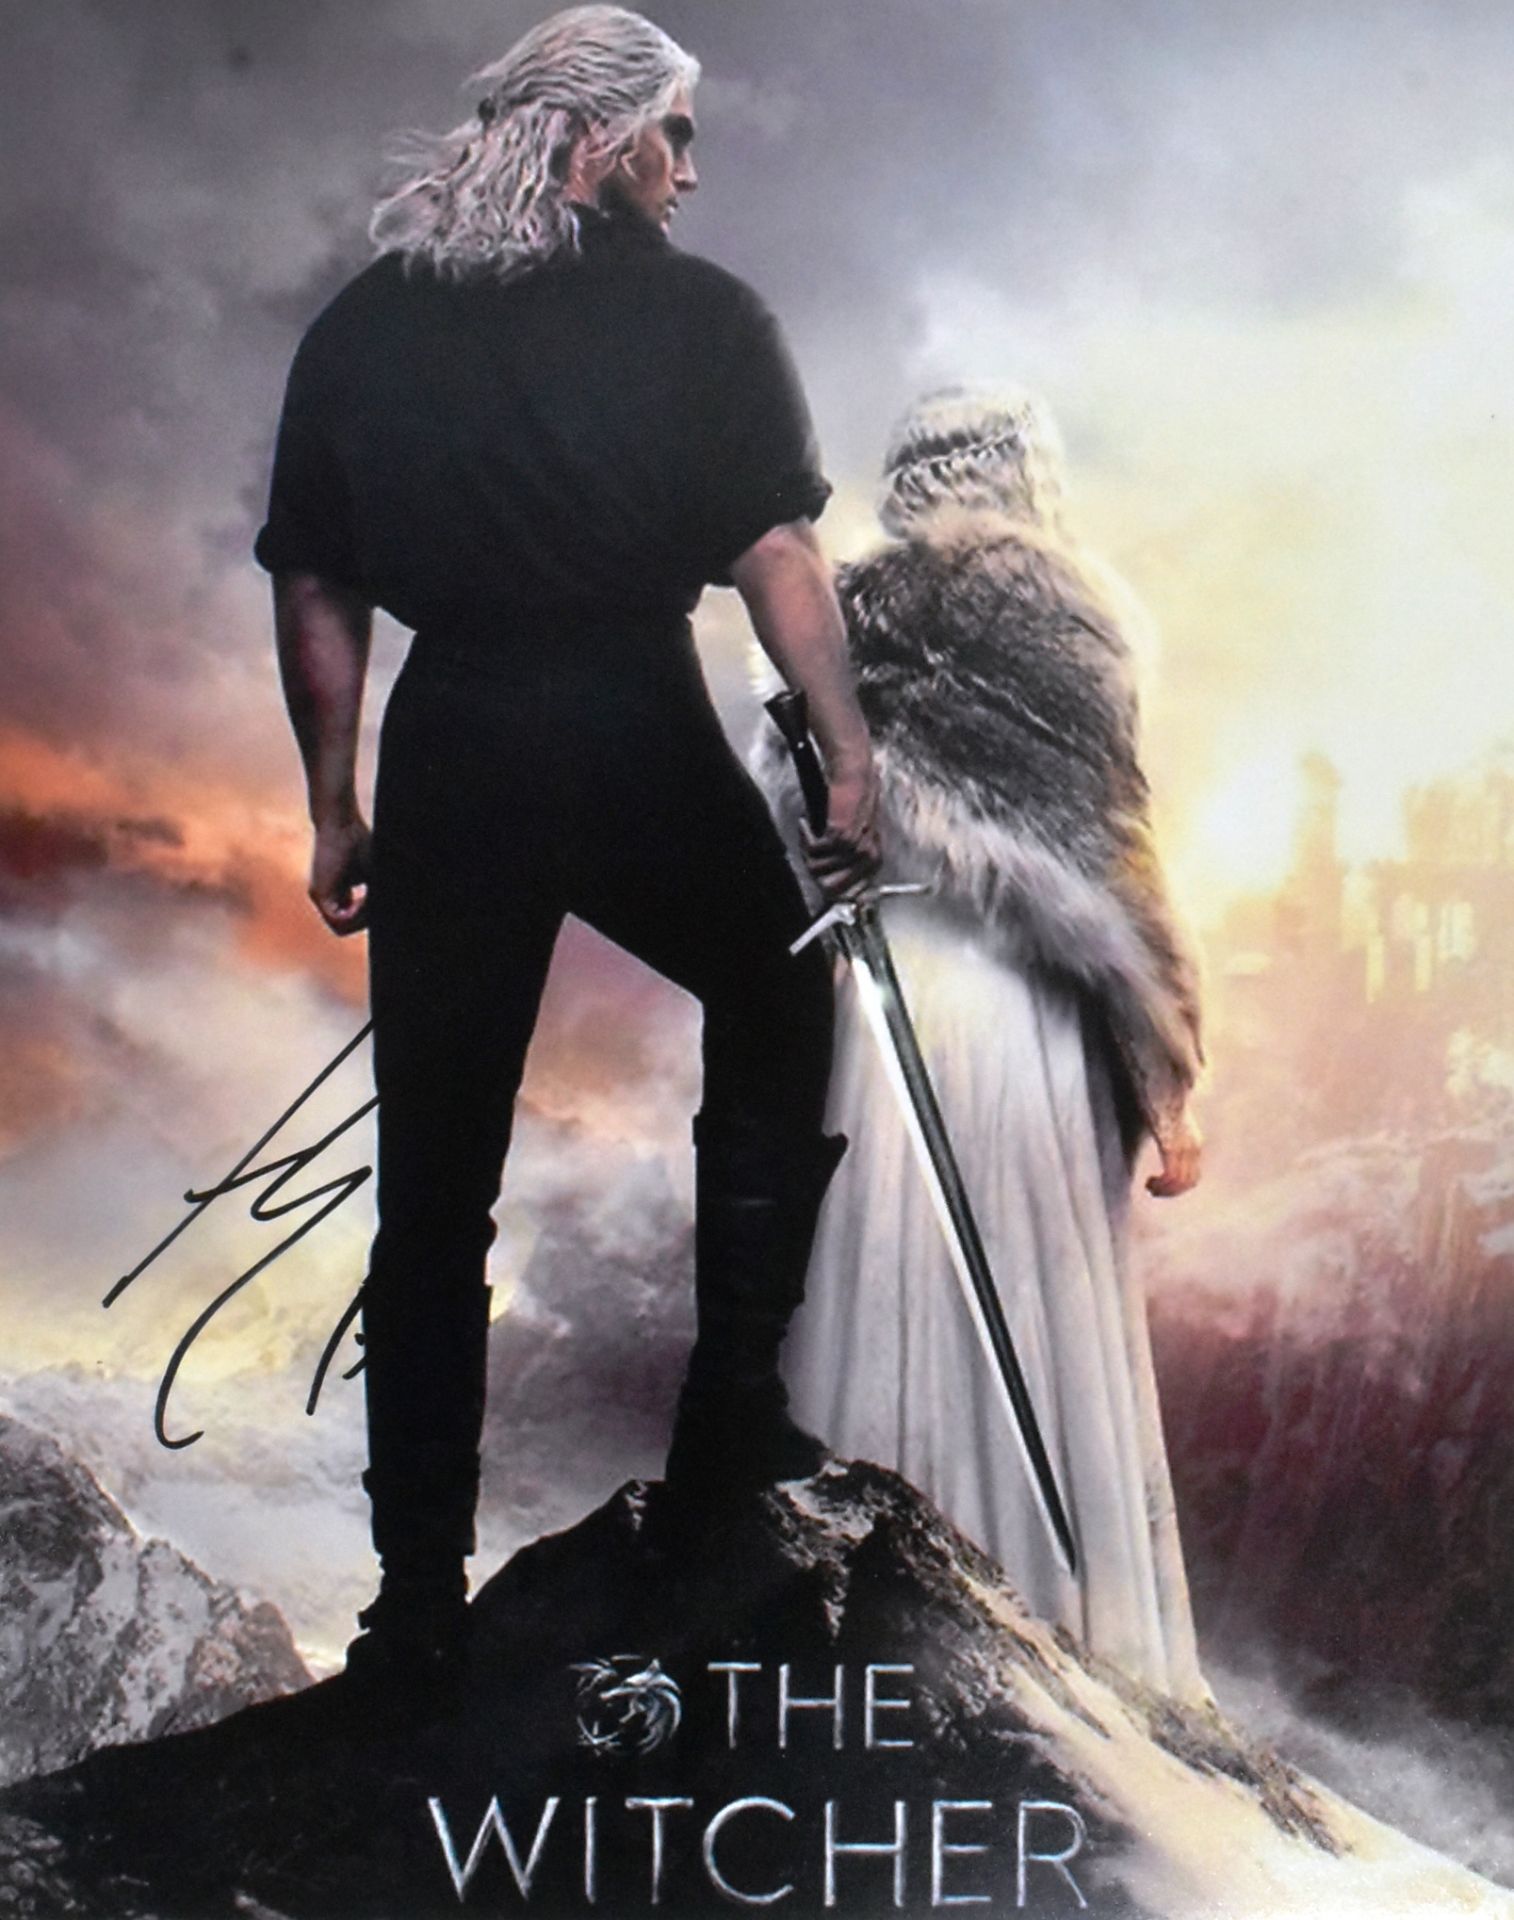 THE WITCHER - HENRY CAVILL - SIGNED 8X10" PHOTO - AFTAL